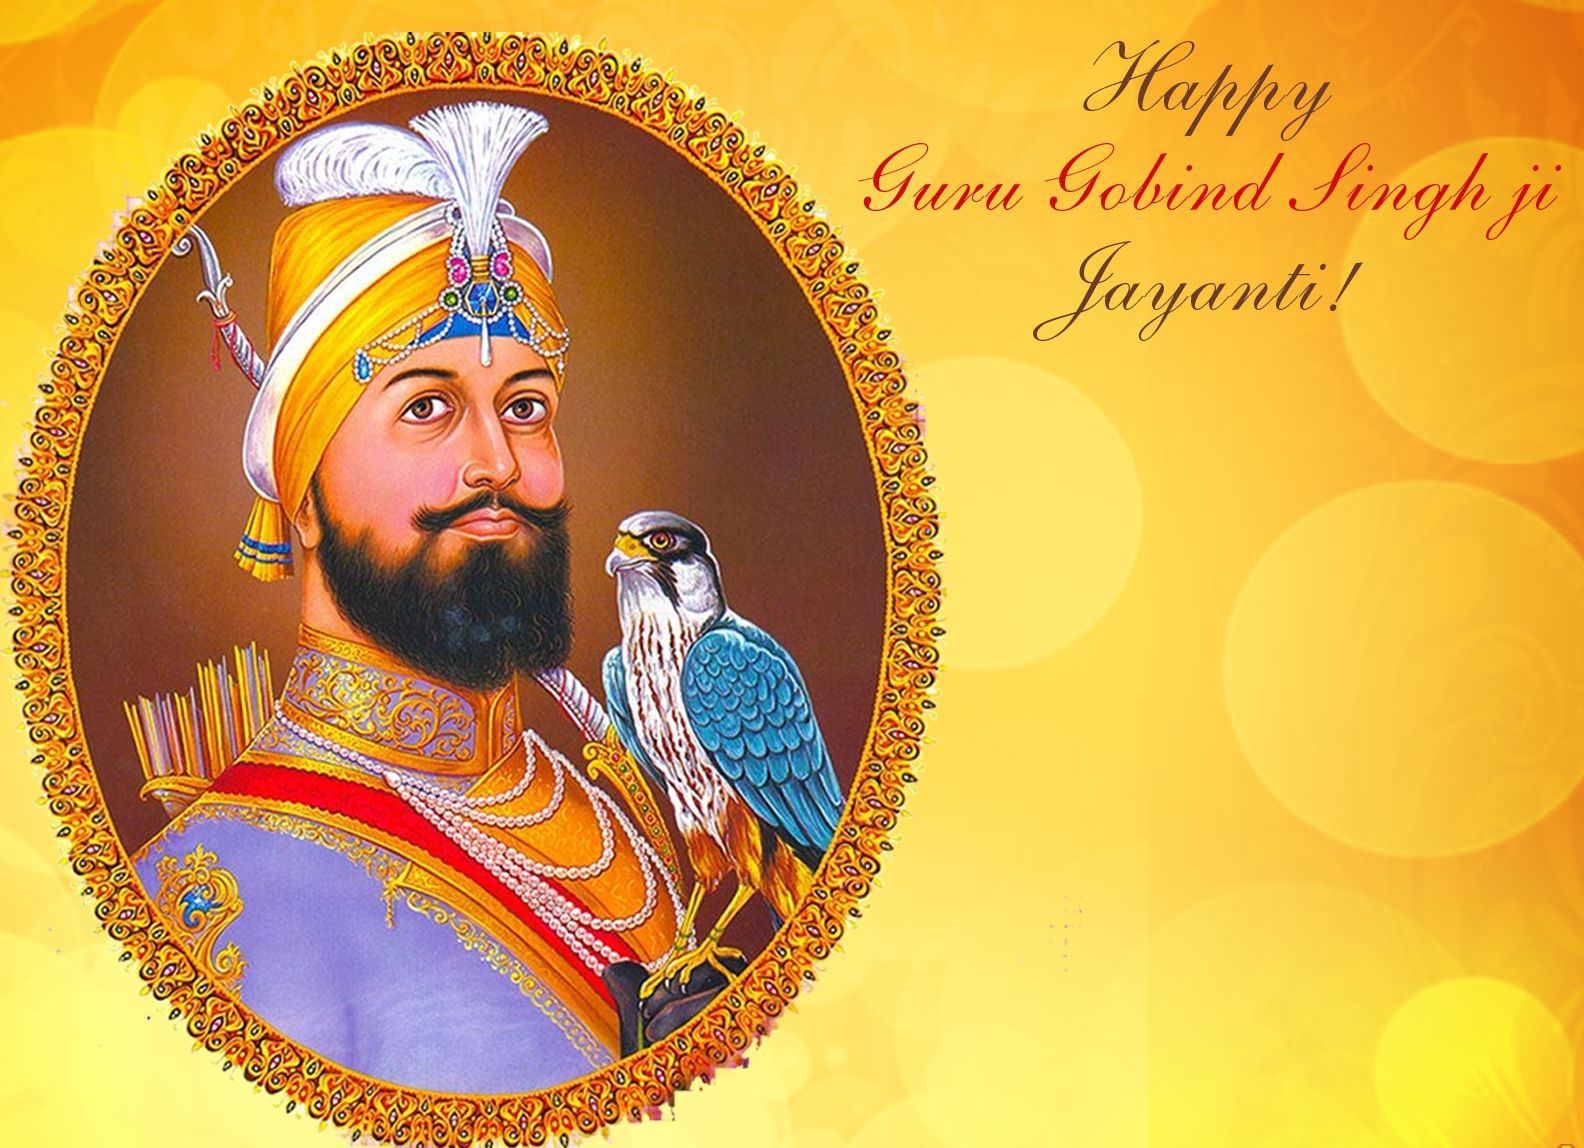 Guru Gobind Singh Jayanti Day 2021: Best Wishes, Great Quotes, Messages-SMS and Greetings